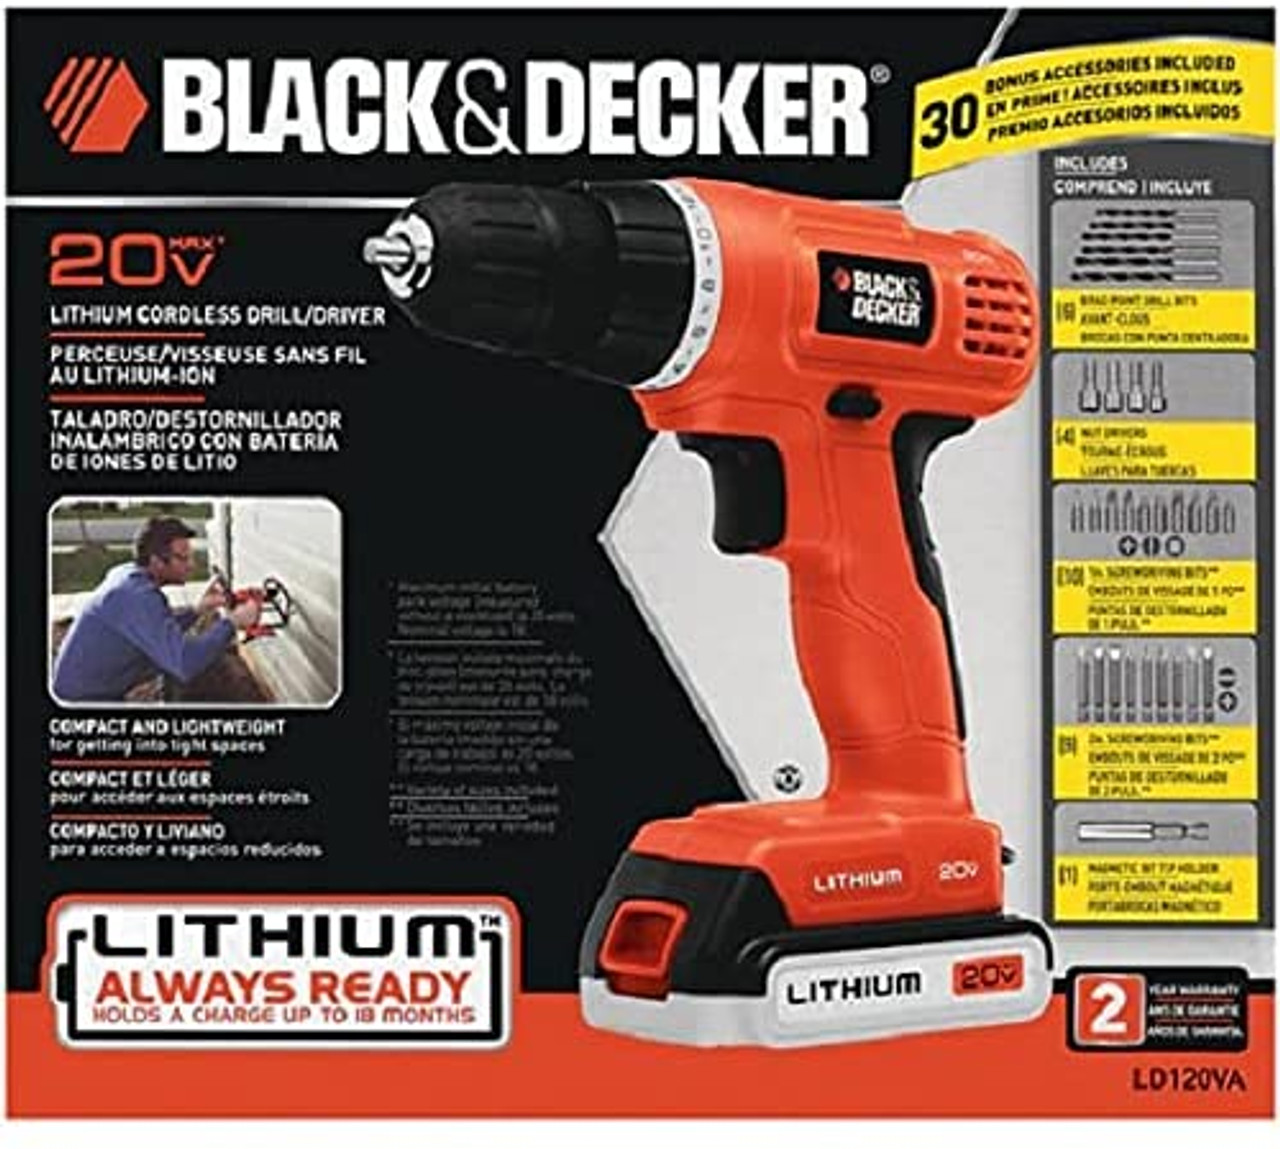 BLACK+DECKER® 20V Max Cordless Drill/Driver with 30-Piece Accessory Kit product image